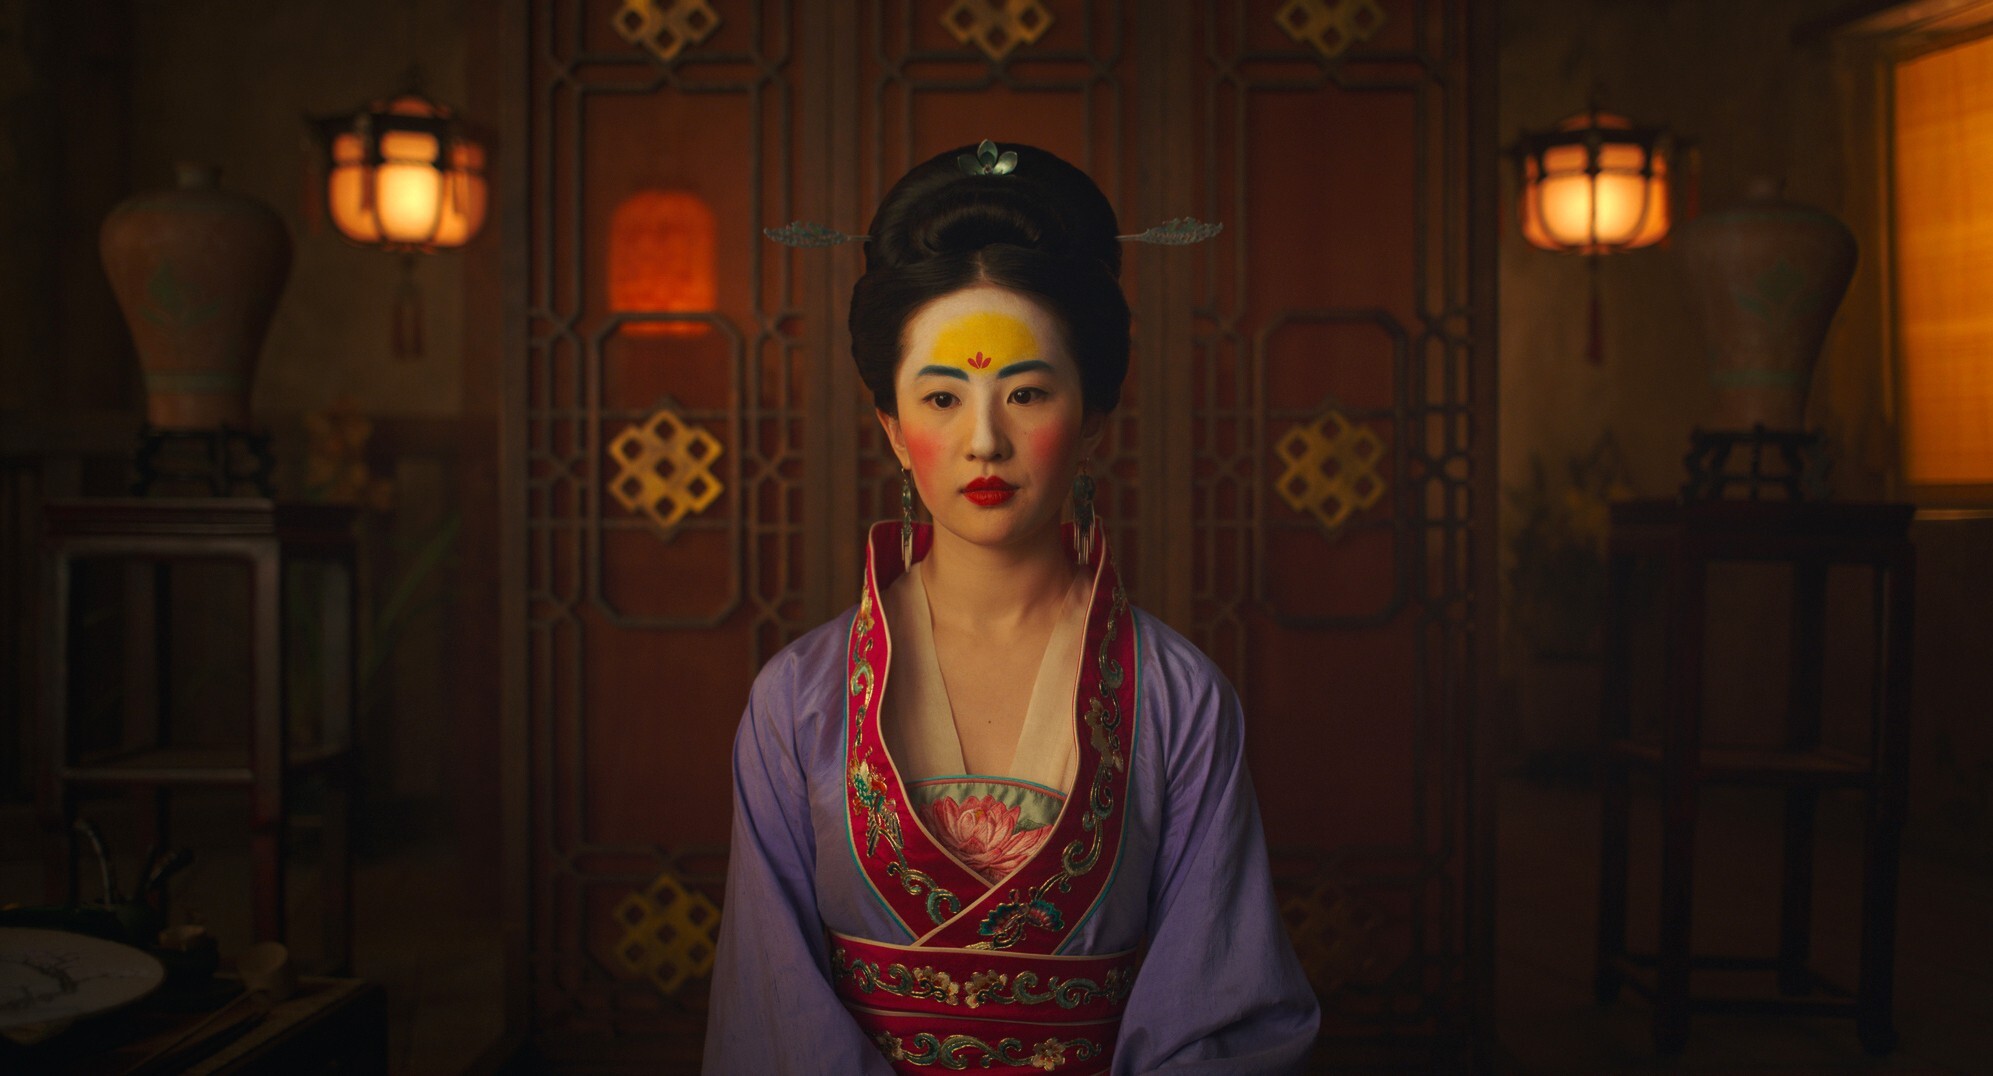 This image released by Disney shows Yifei Liu in the title role of "Mulan." (Disney via AP)